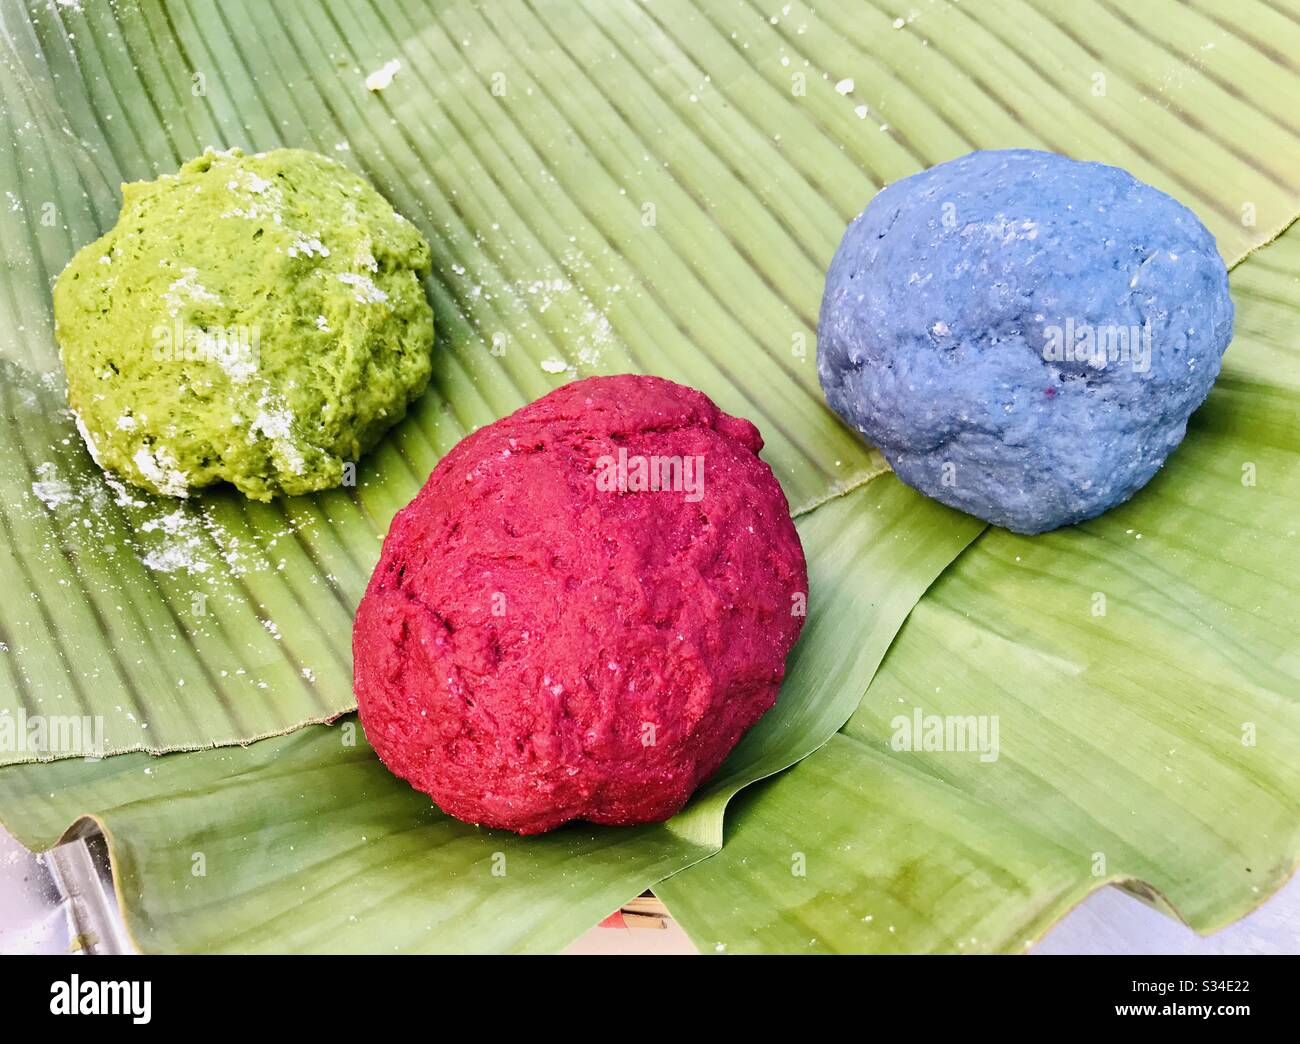 Healthy eats from scratch. Corn flour are used to make the noodle base, naturally tinted with nature using malunggay (moringa), beetroot and blue pea. Creative food preparation. Stock Photo